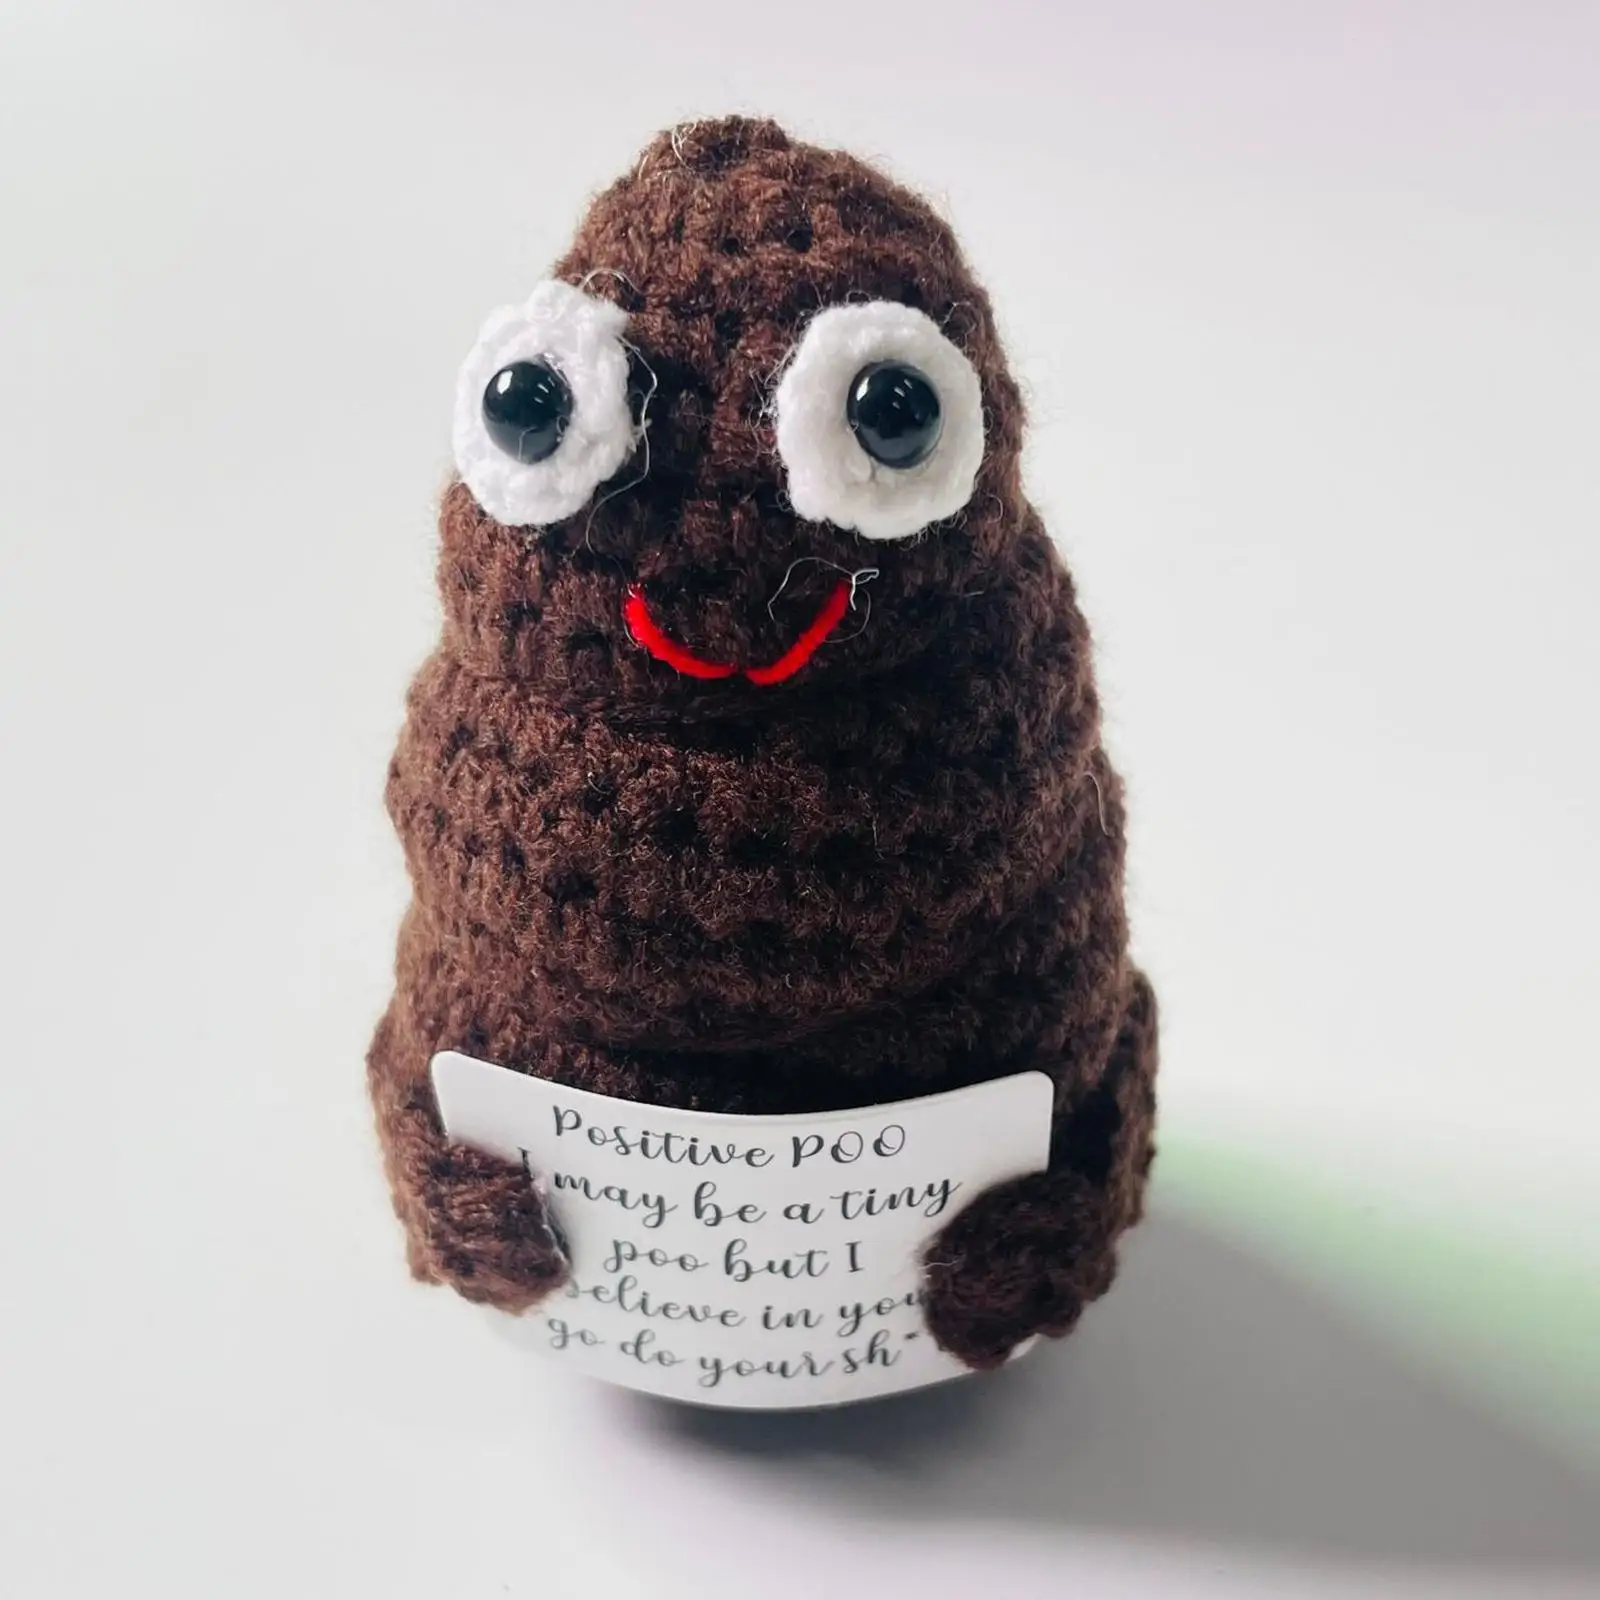 Mini Positive Poo Hug Gifts Creative Positive Poo Knitted Doll for Desktop  Office Home Decor Holiday Party - AliExpress